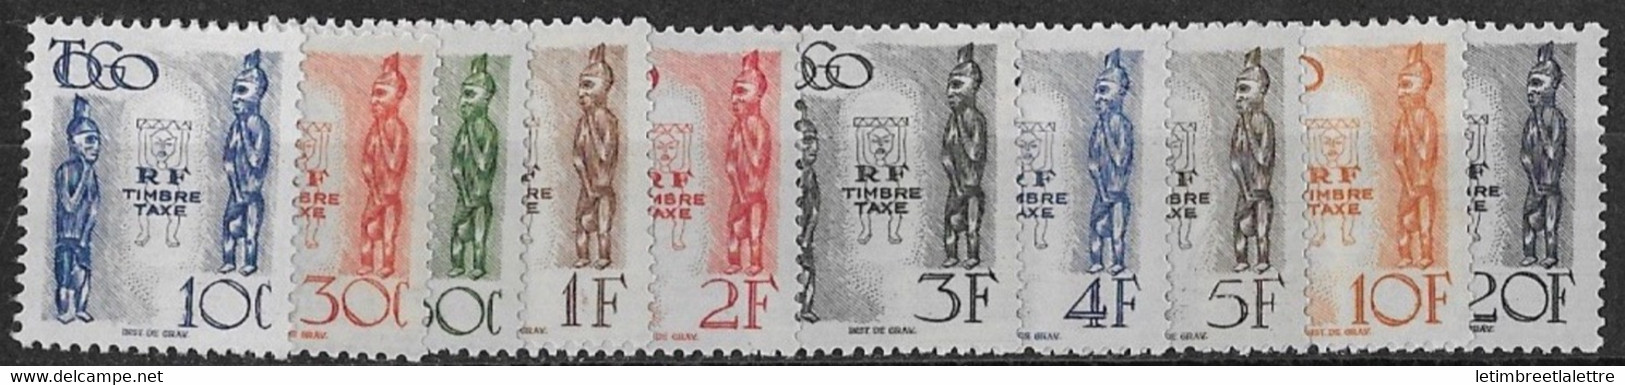 ⭐ Togo - Taxe - YT N° 38 à 47 * - Neuf Avec Charnière - 1947 ⭐ - Unused Stamps